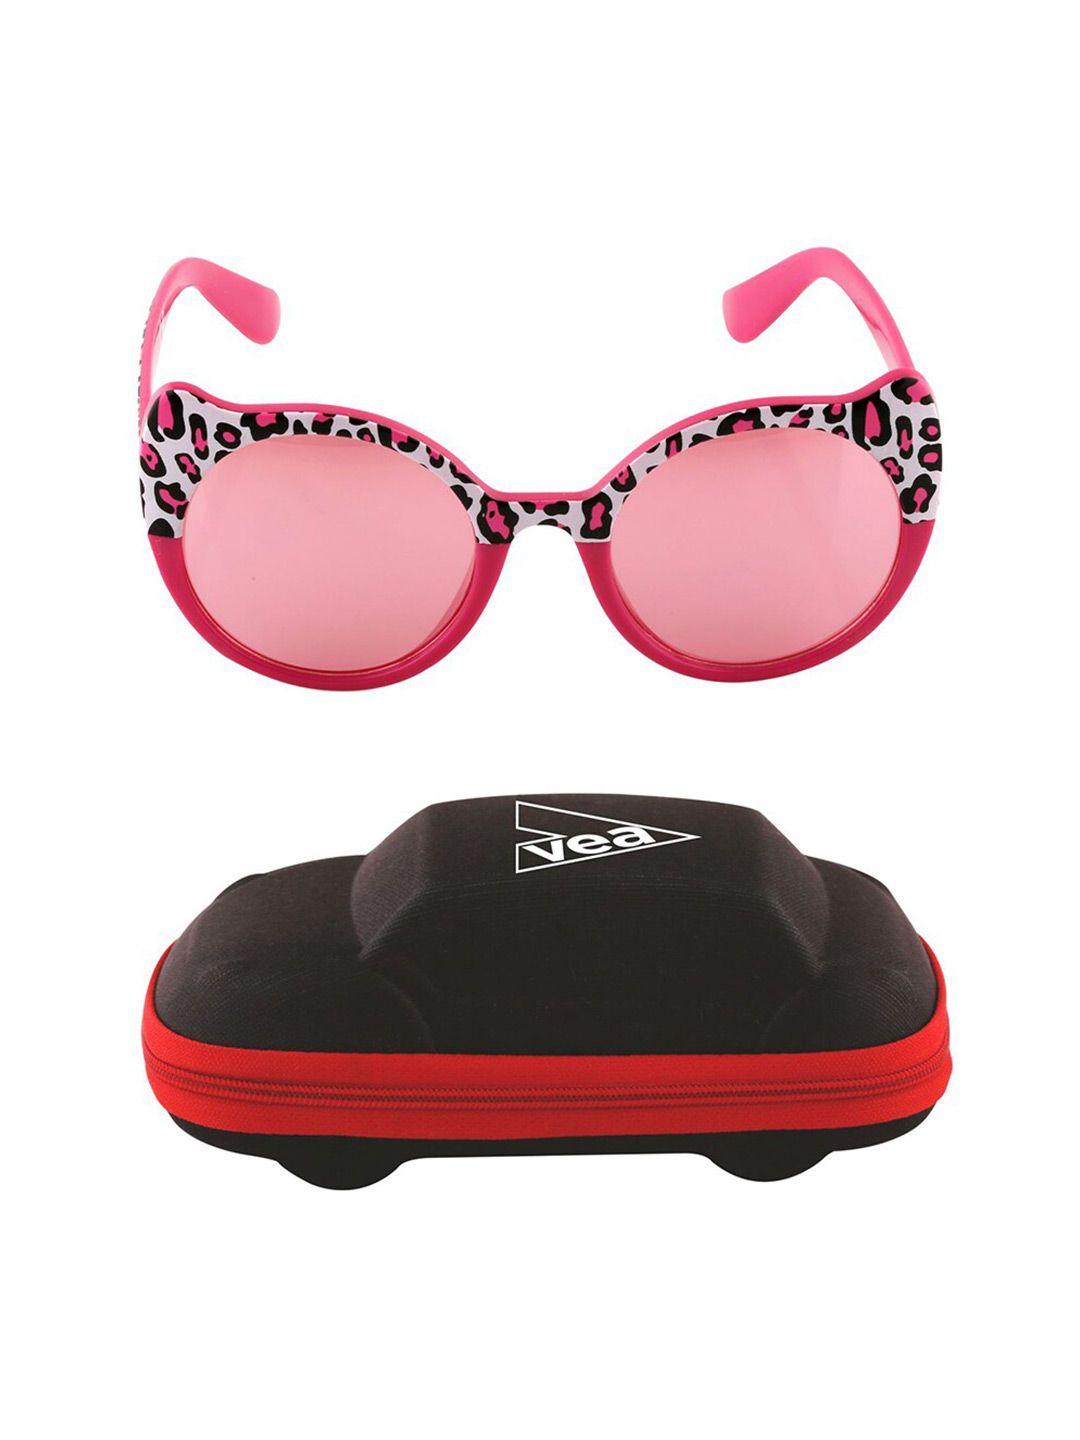 vea girls round sunglasses with uv protected lens